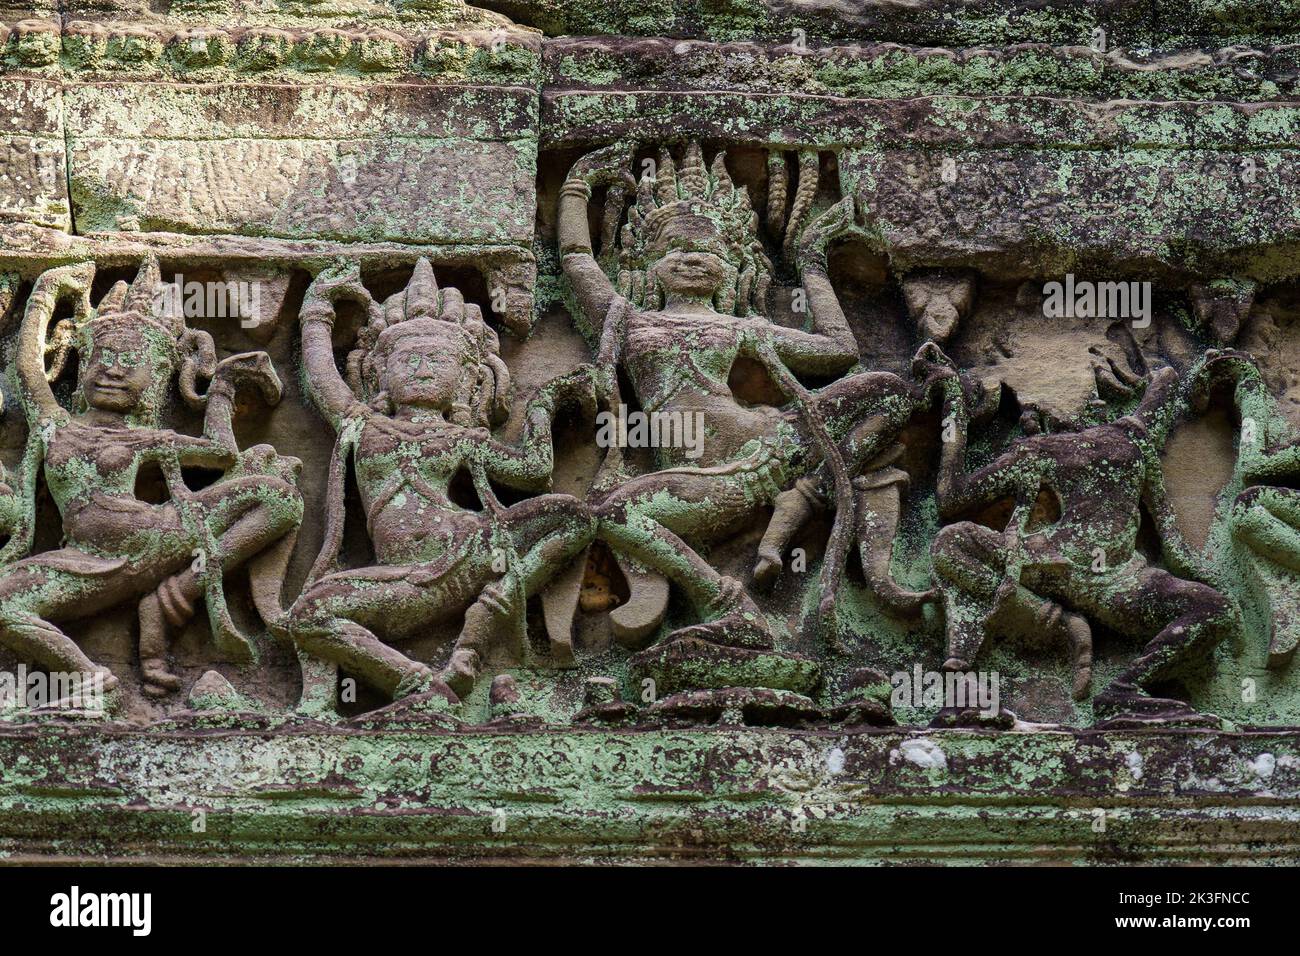 Cambodia. Siem Reap. The archaeological park of Angkor. A bas relief sculpture of apsara dancer at Preah Khan 12th century Hindu temple Stock Photo